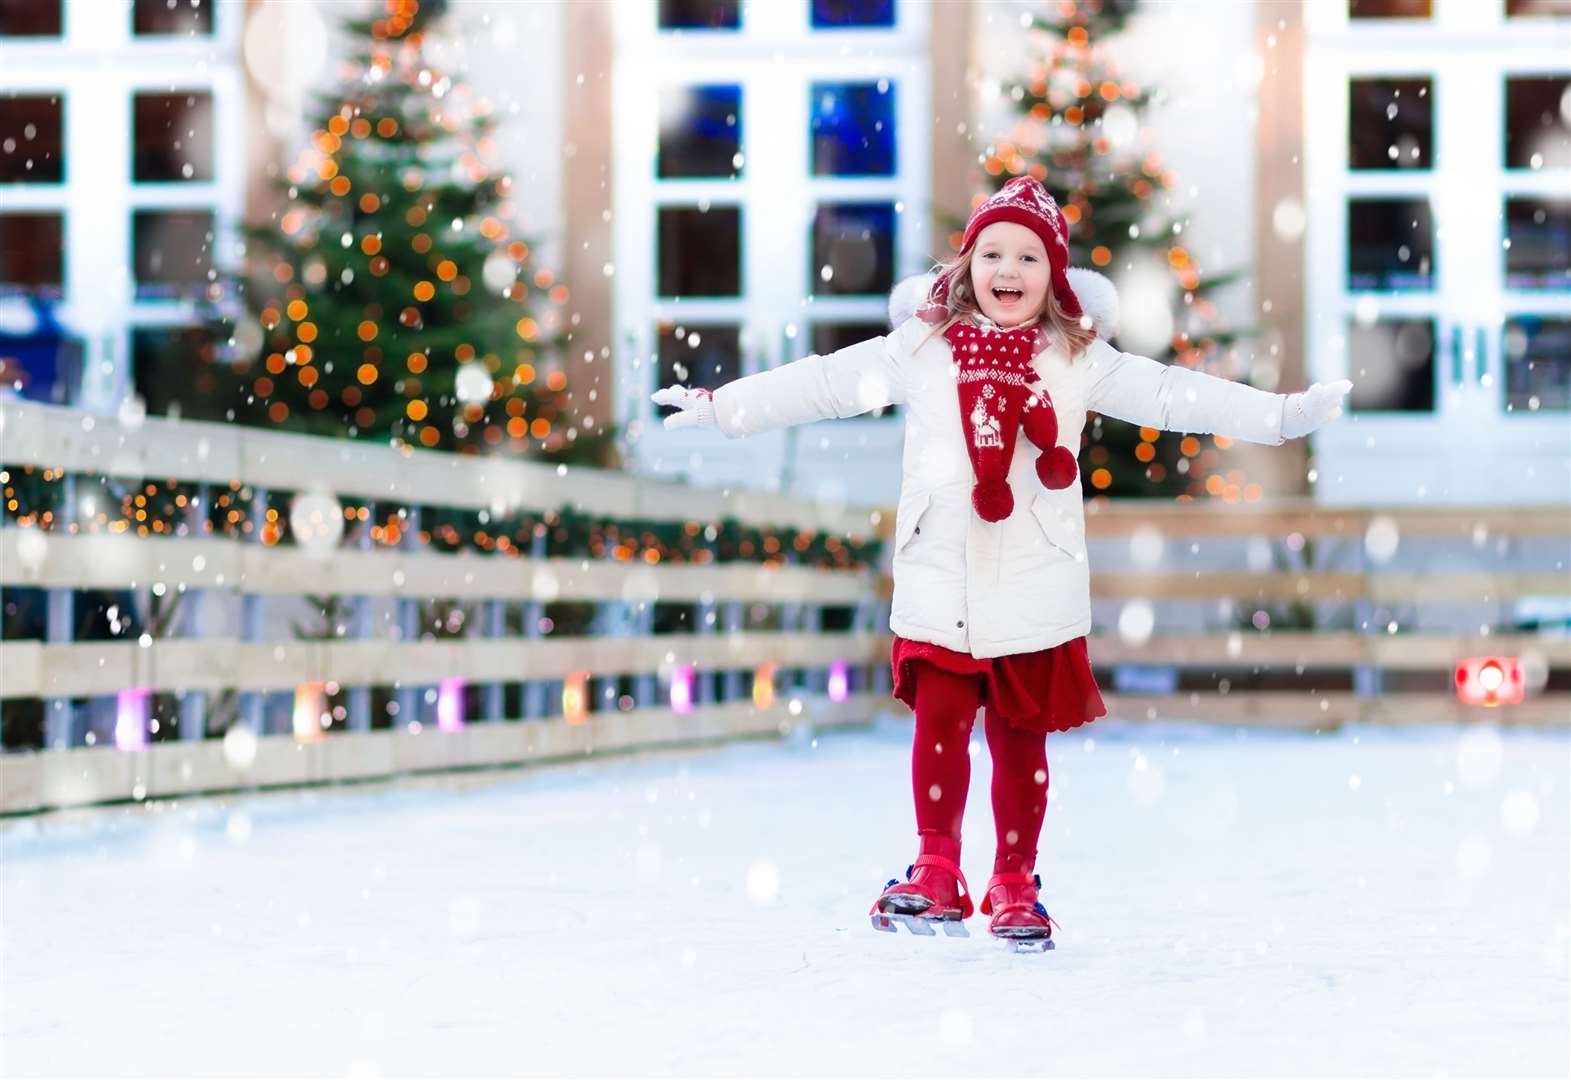 Get your skates! The ice rinks opening near you